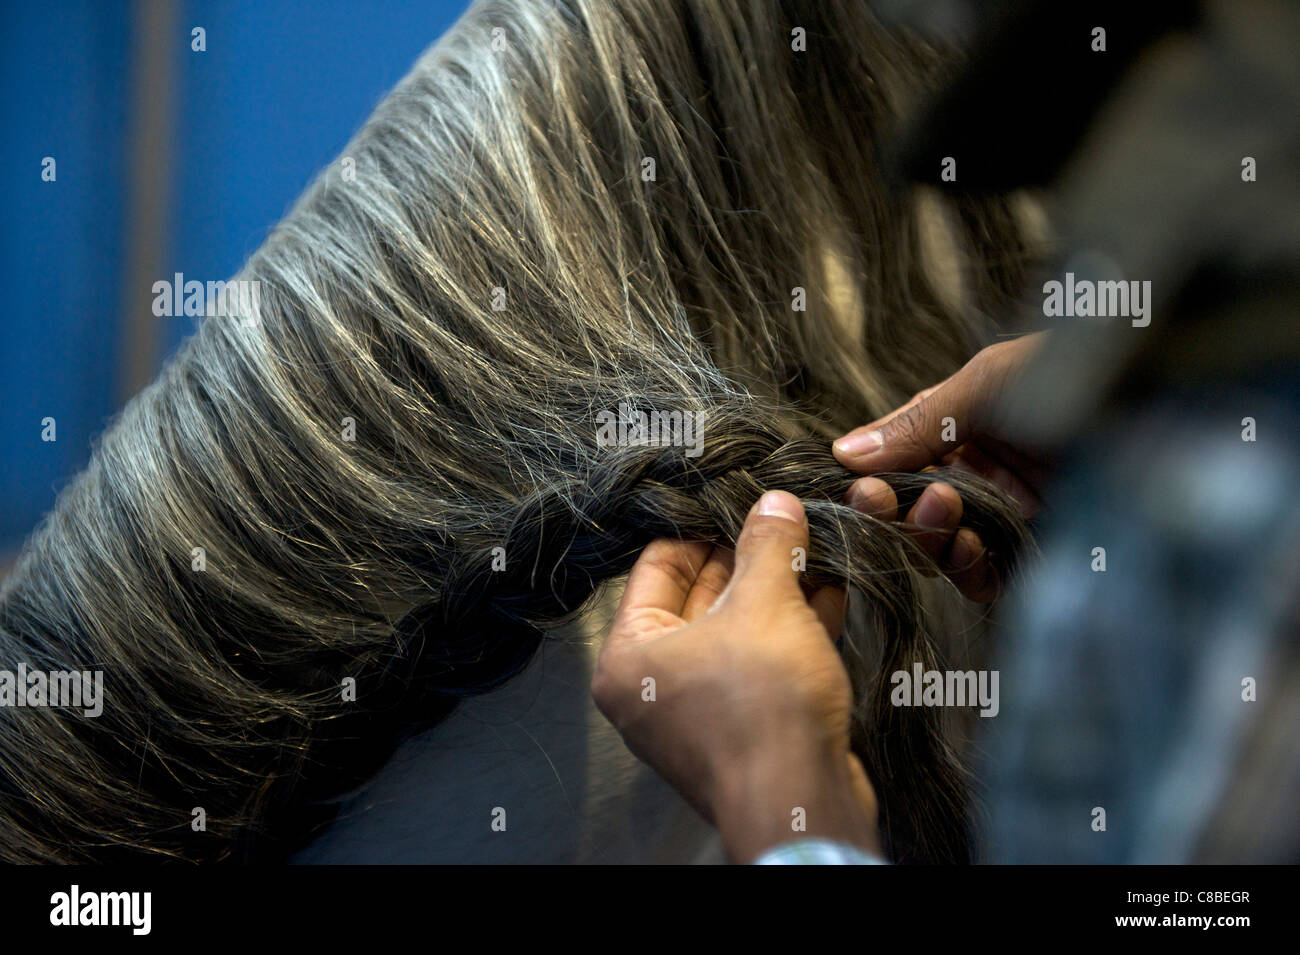 A man tidies a horse's mane during China Horse Fair 2011 in Beijing, China. 14-Oct-2011 Stock Photo